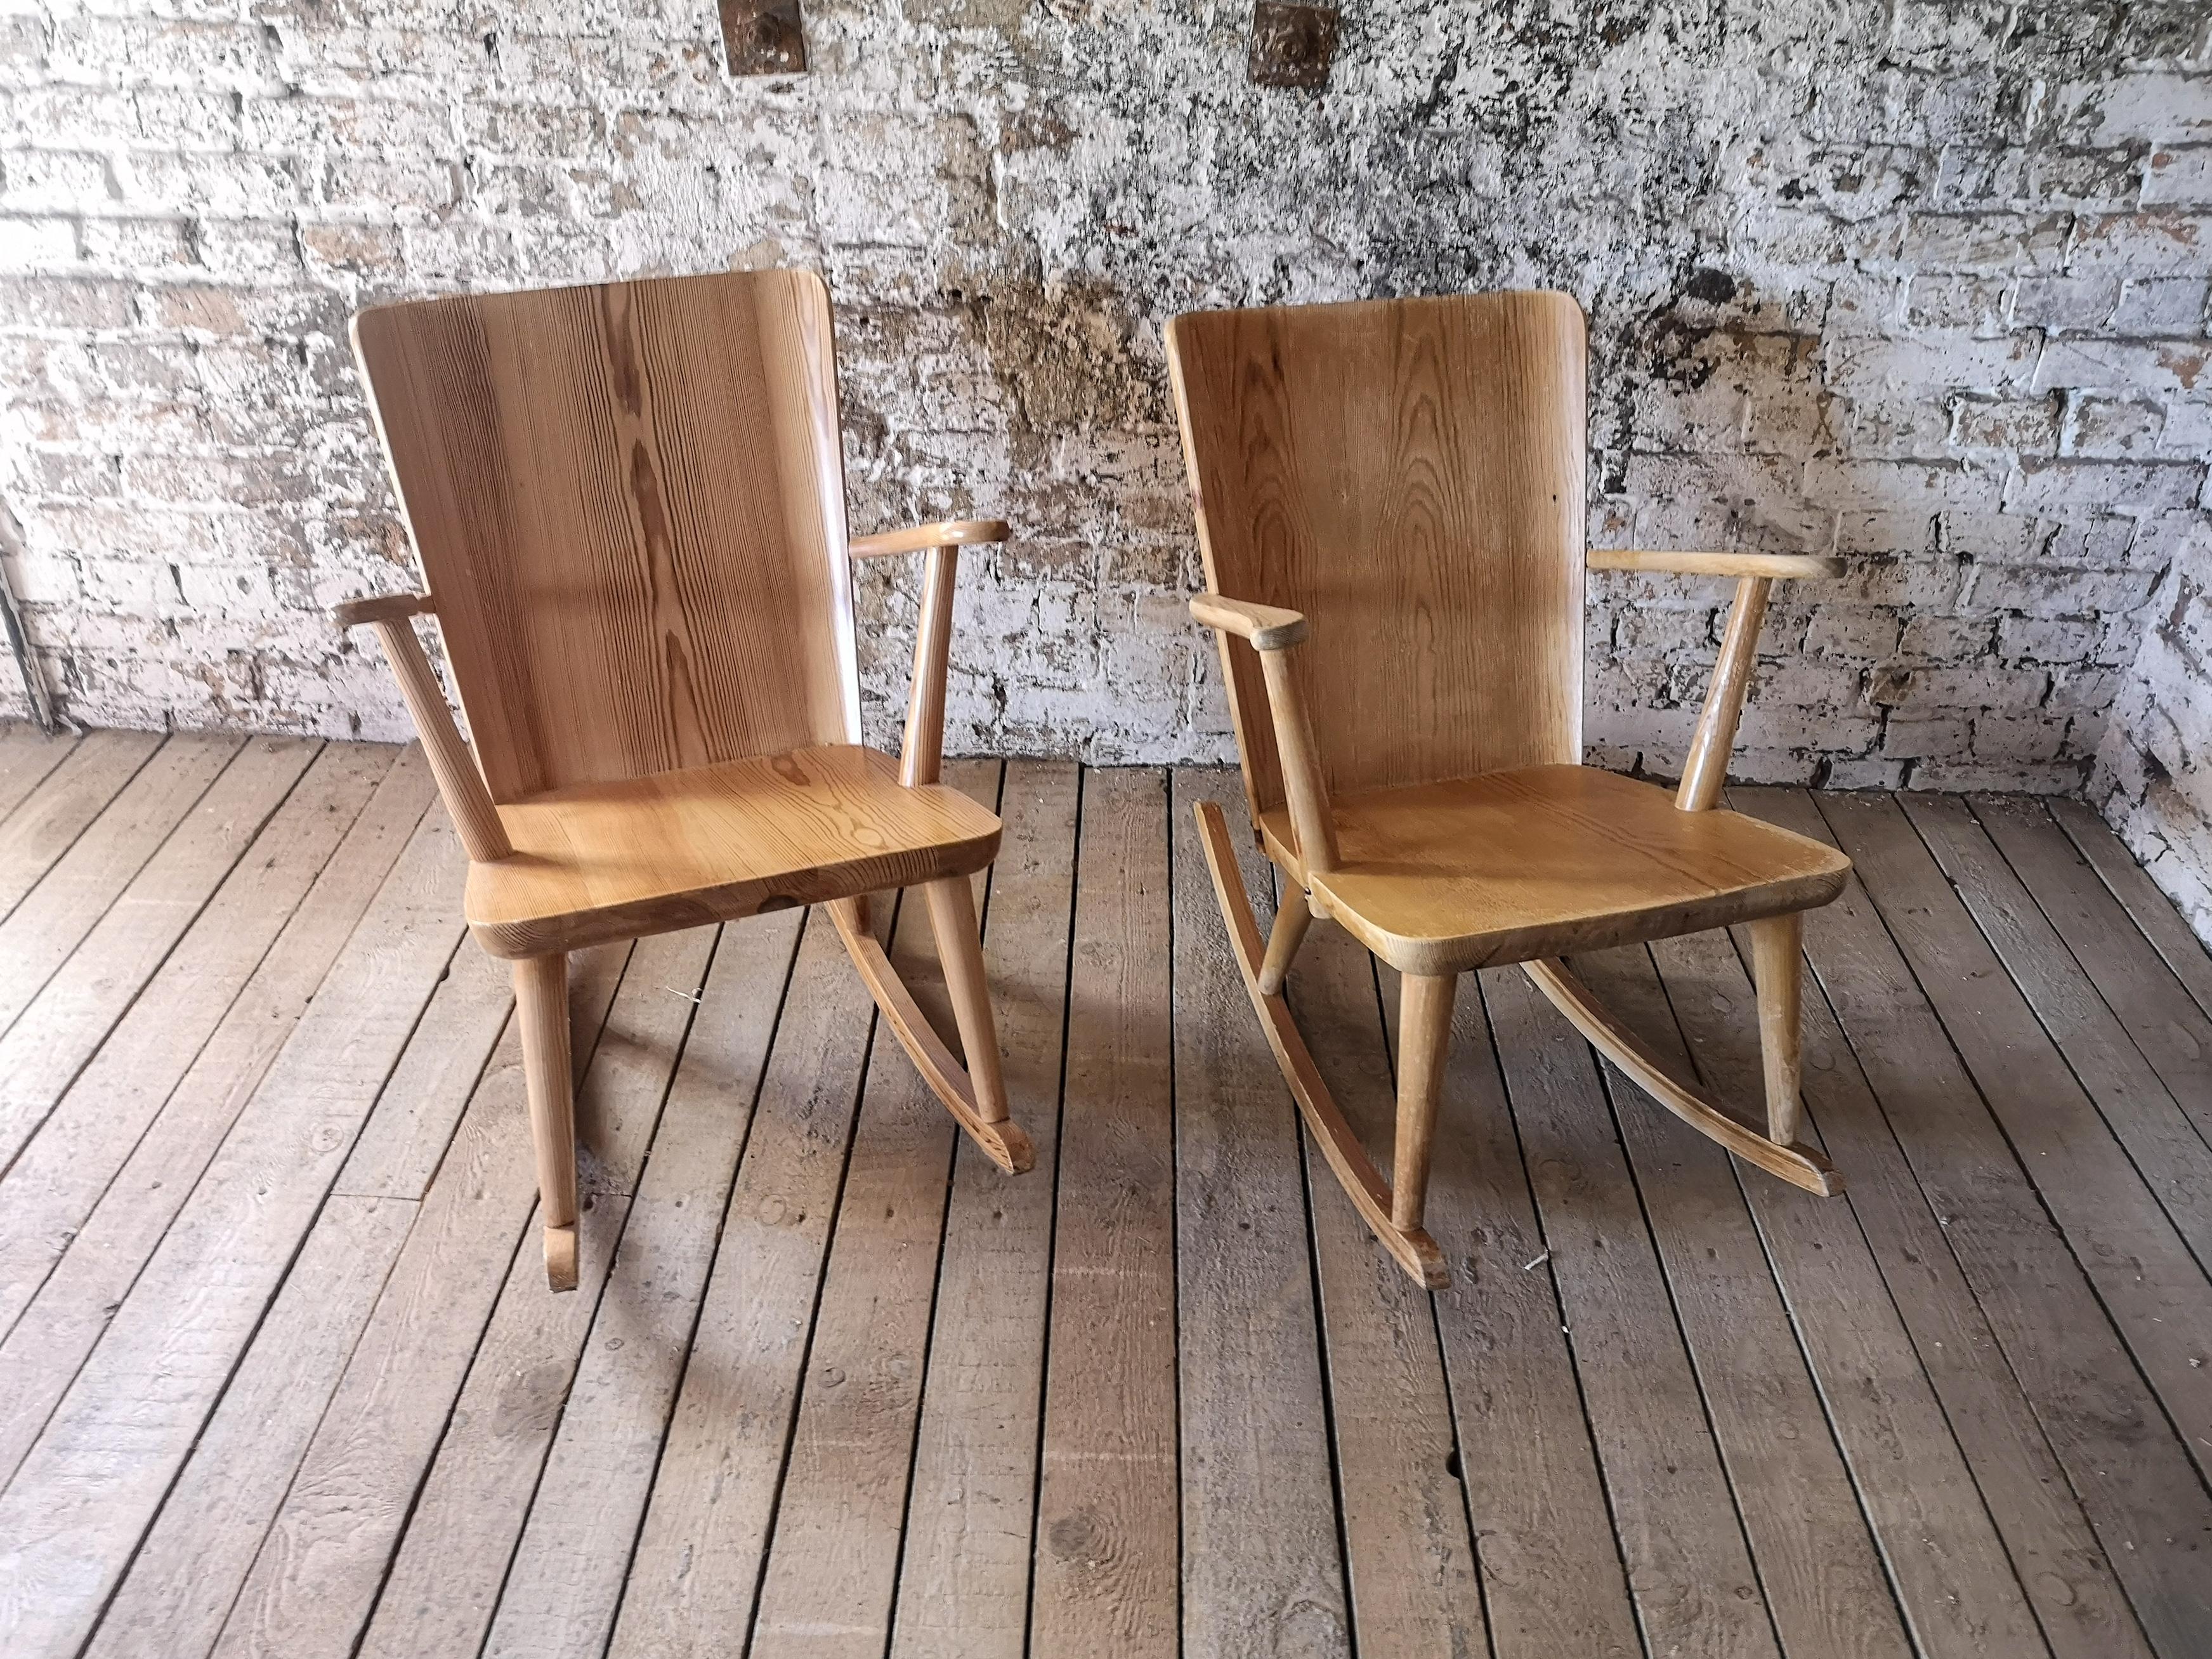 Rocking chairs, made in solid pine, designed by Göran Malmvall for Svensk Fur, Sweden. 
Modernist design in traditional Swedish workmanship, made to adapt to the new era in the late 1930s and early 1940s Swedish summer houses. 

One of the chairs